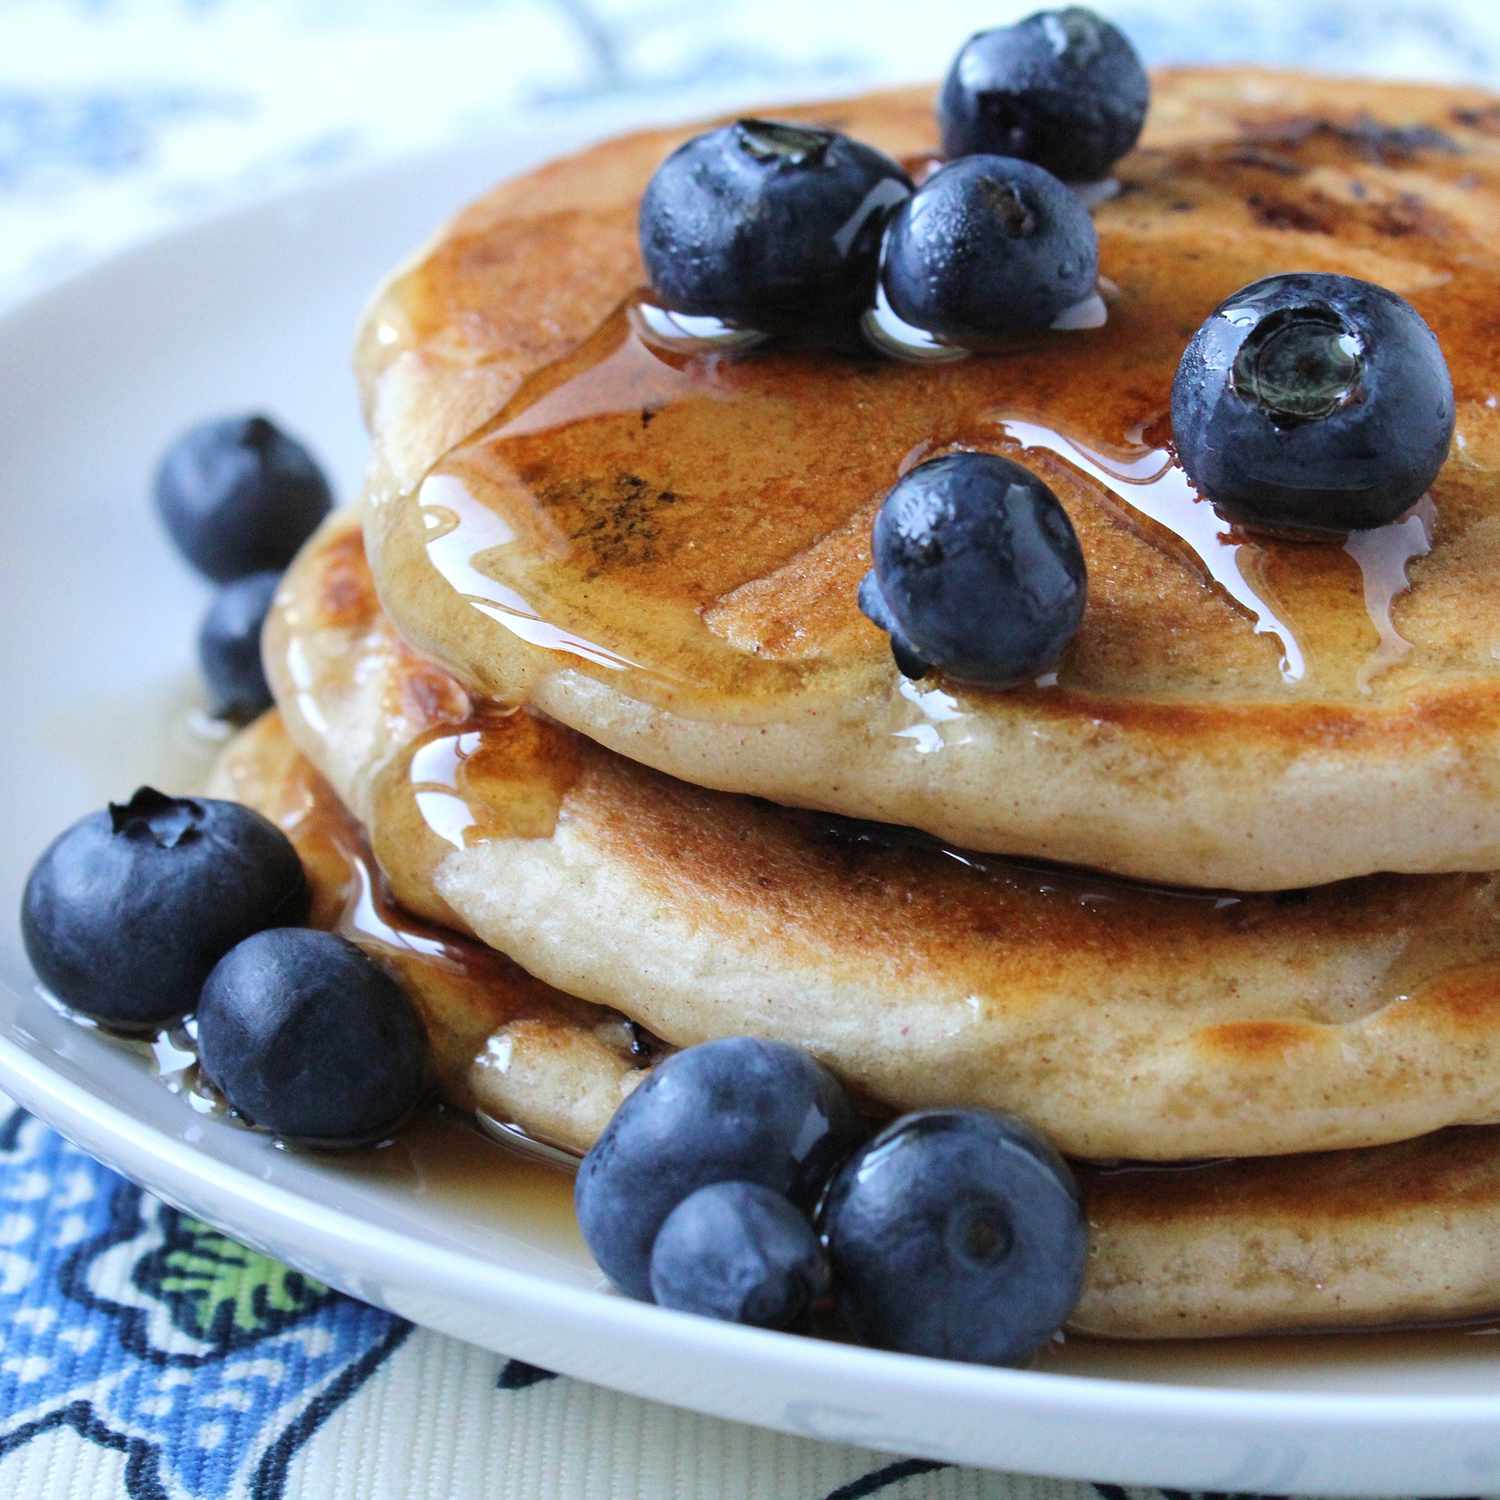 close up view of Todd's Famous Blueberry Pancakes on a plate, garnished with blueberries and syrup